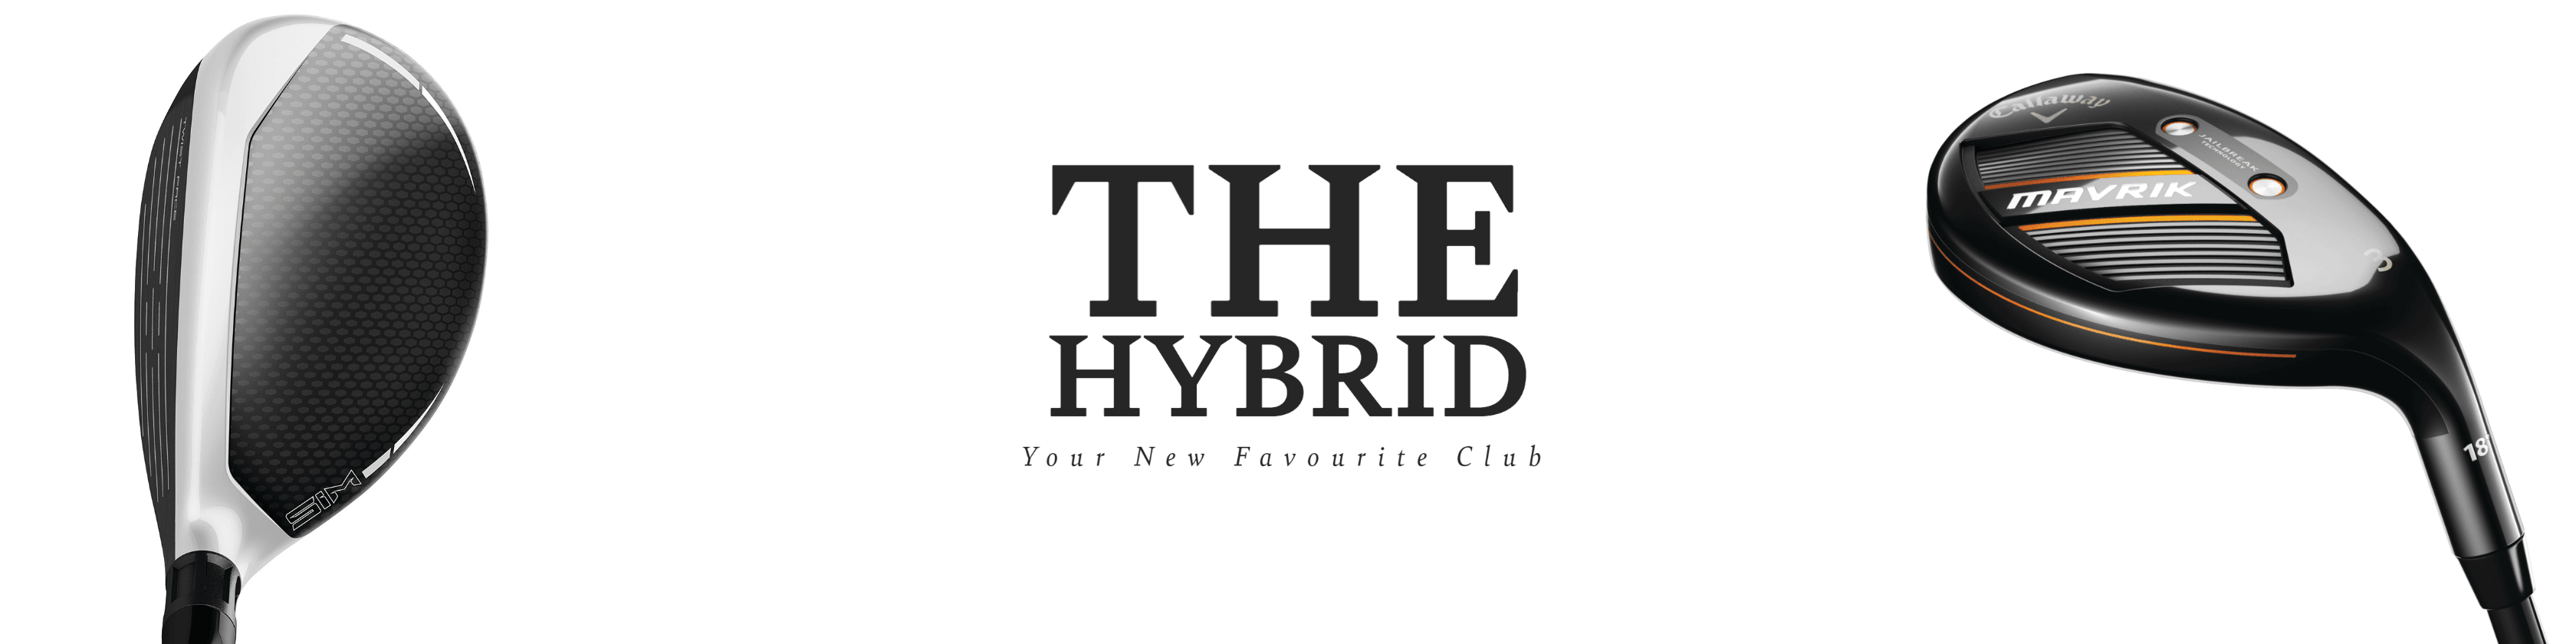 Hybrids Pacific Golf Warehouse 